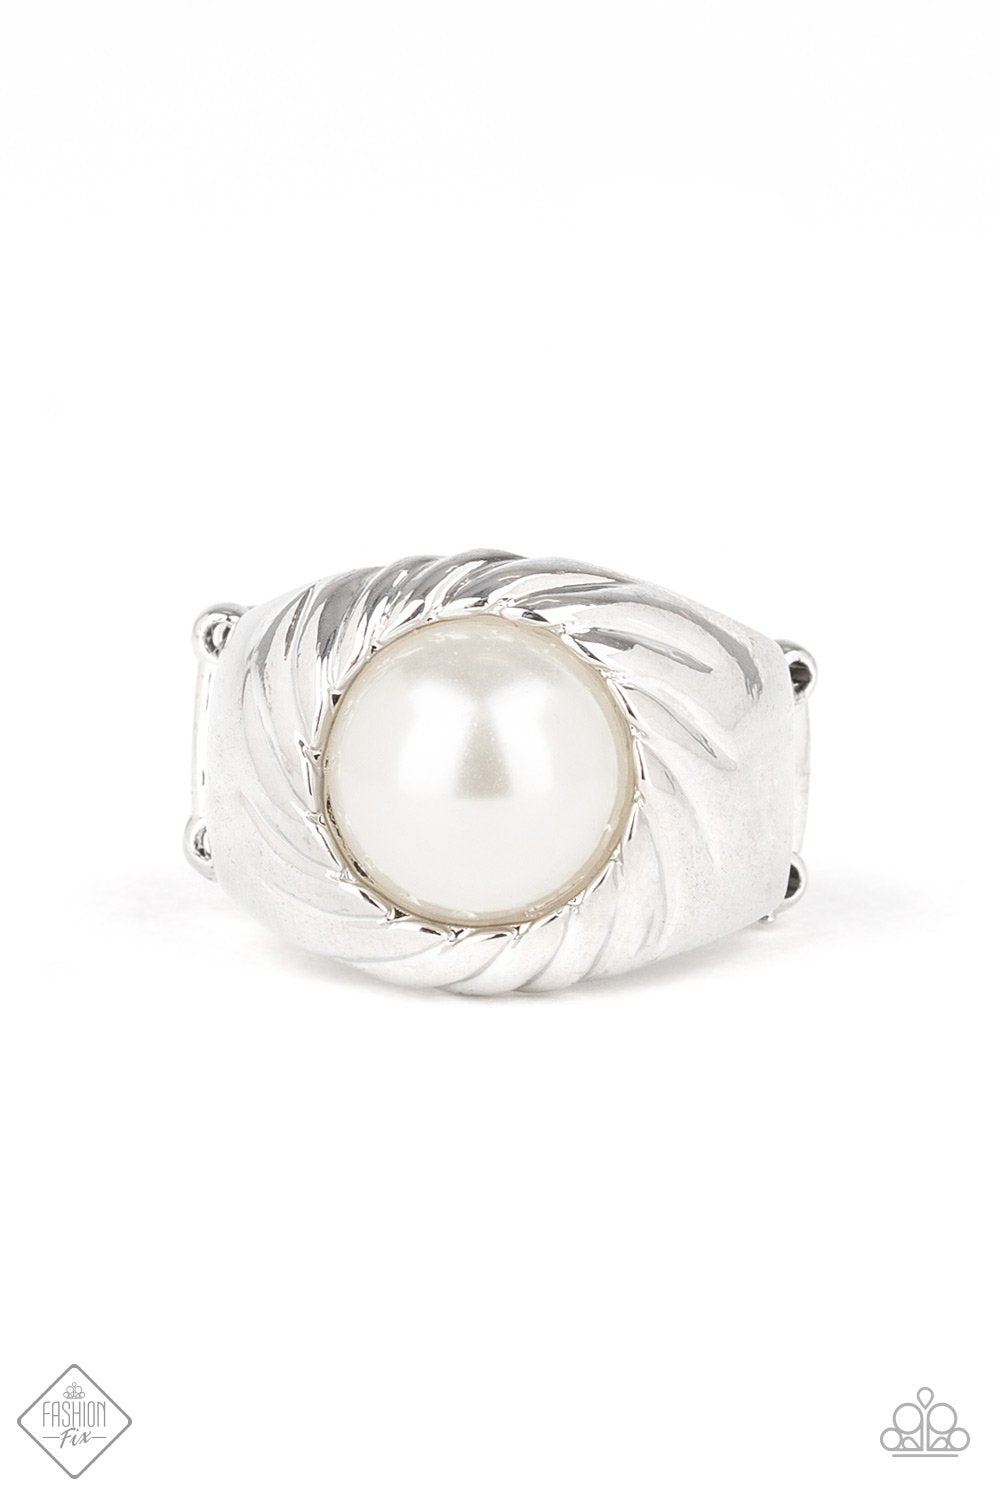 Paparazzi Wall Street Whimsical White - Ring - Fashion Fix Exclusive September 2019